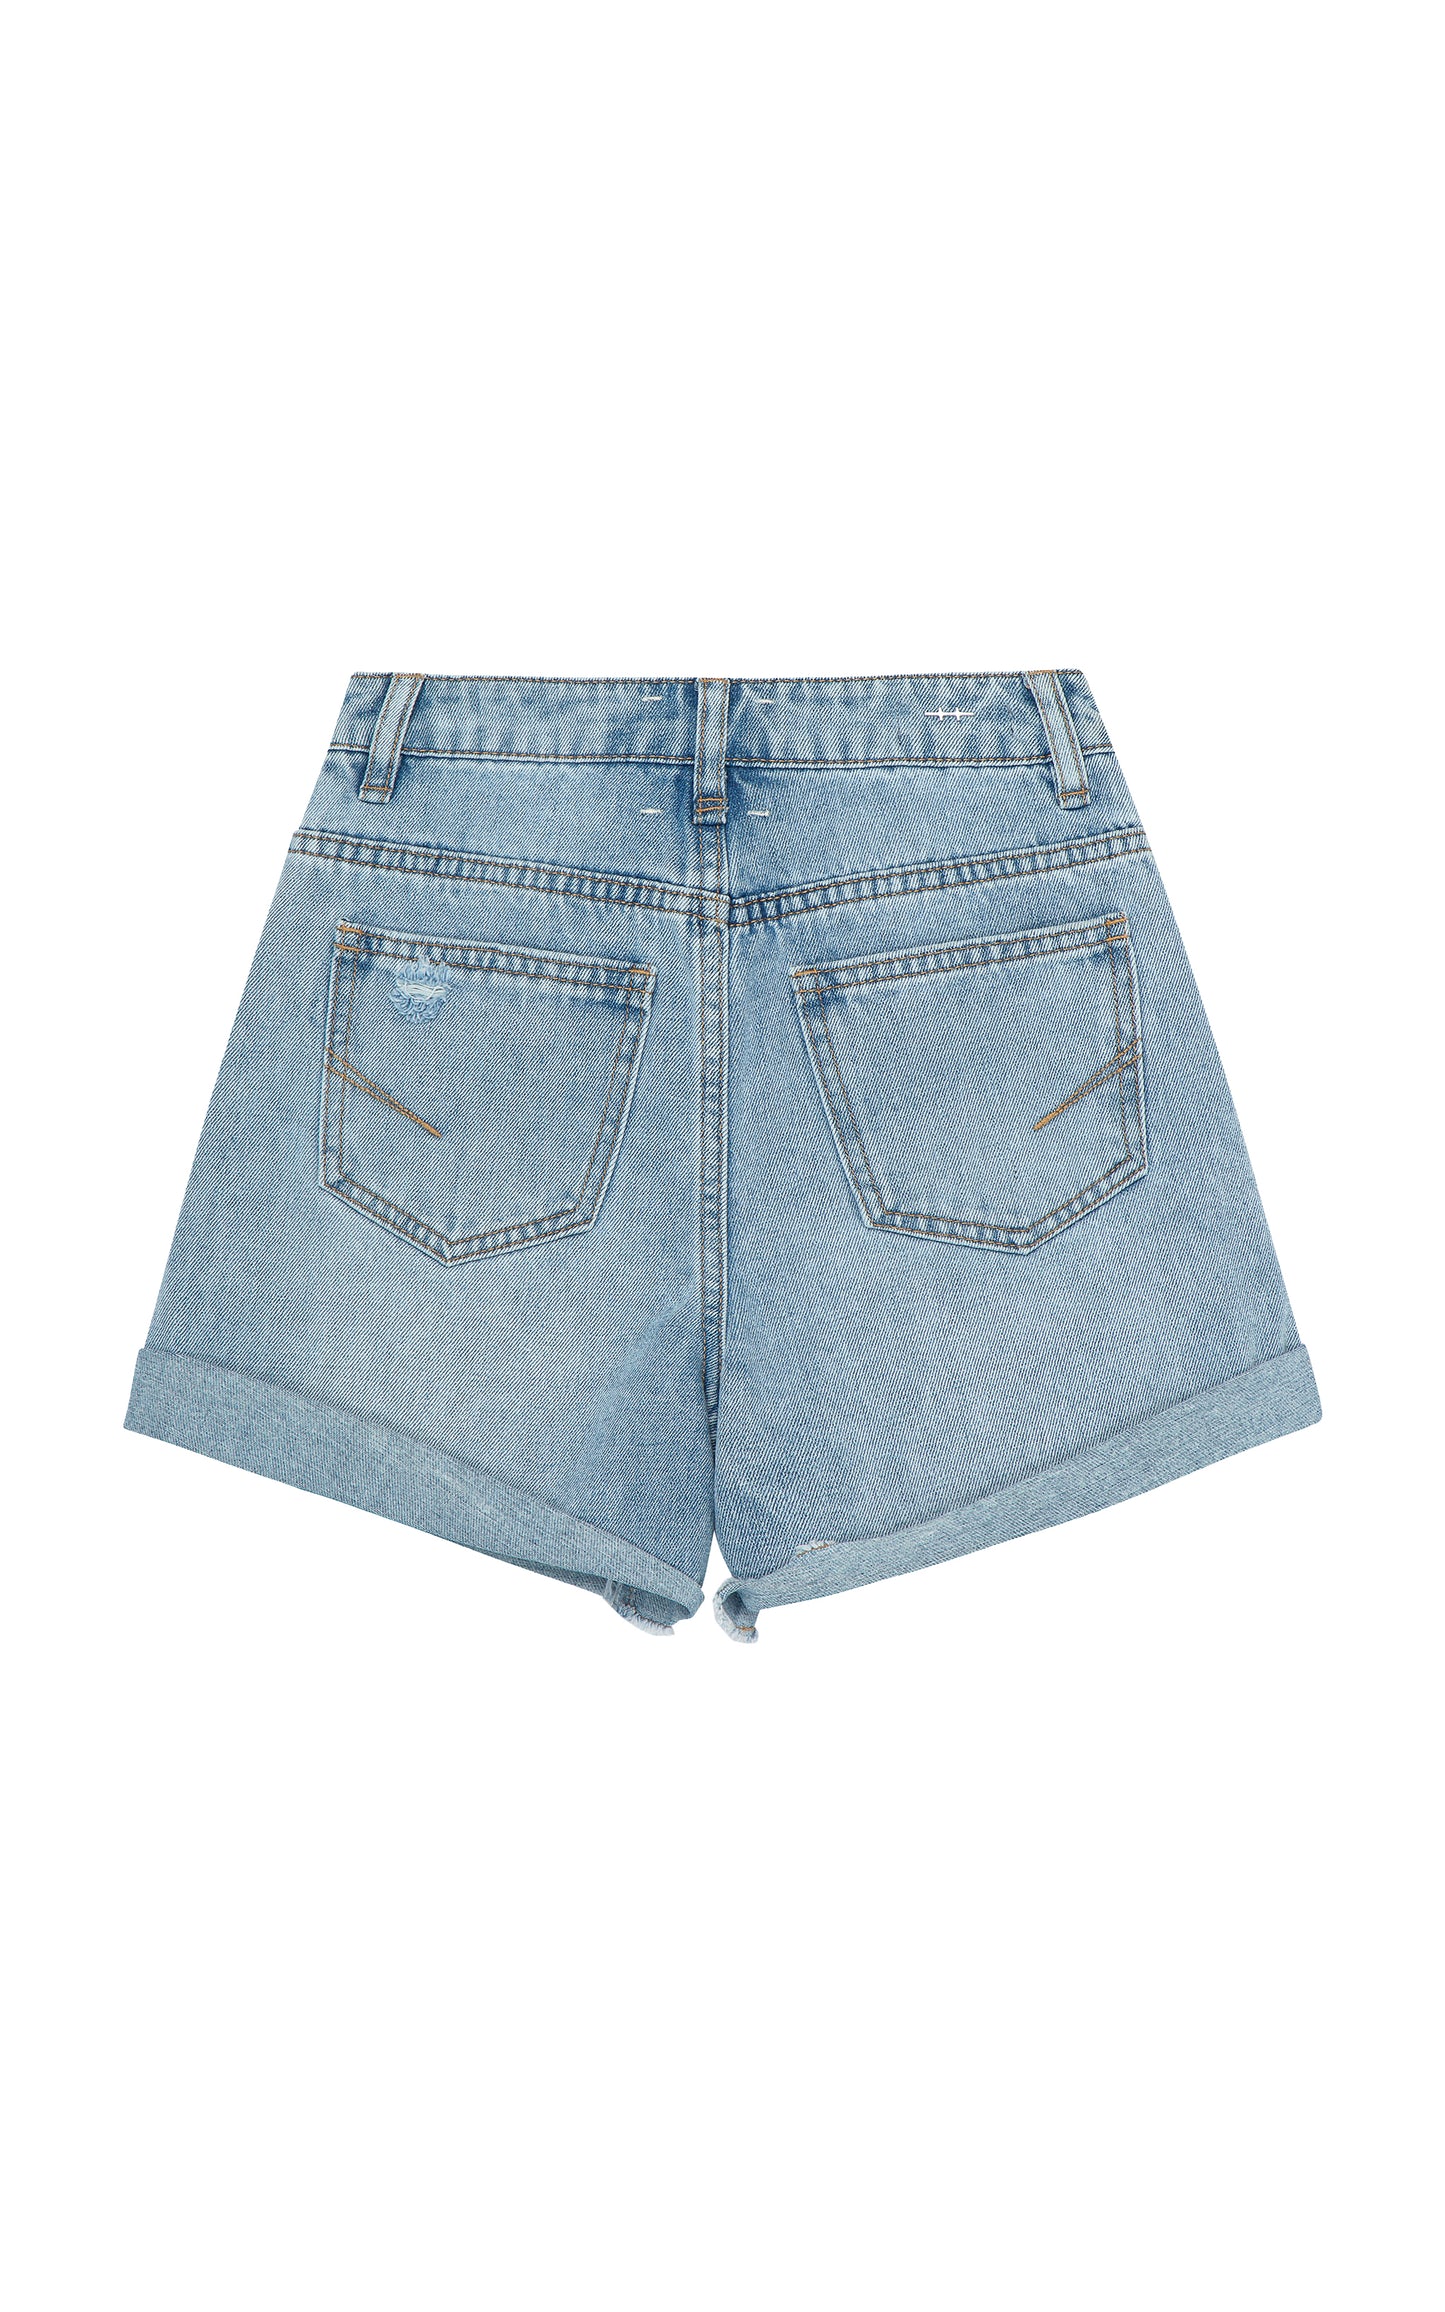 BACK OF LIGHT BLUE WASH DENIM CUT OFF SHORTS WITH ROLLED HEM AND SLIGHT DISTRESSING